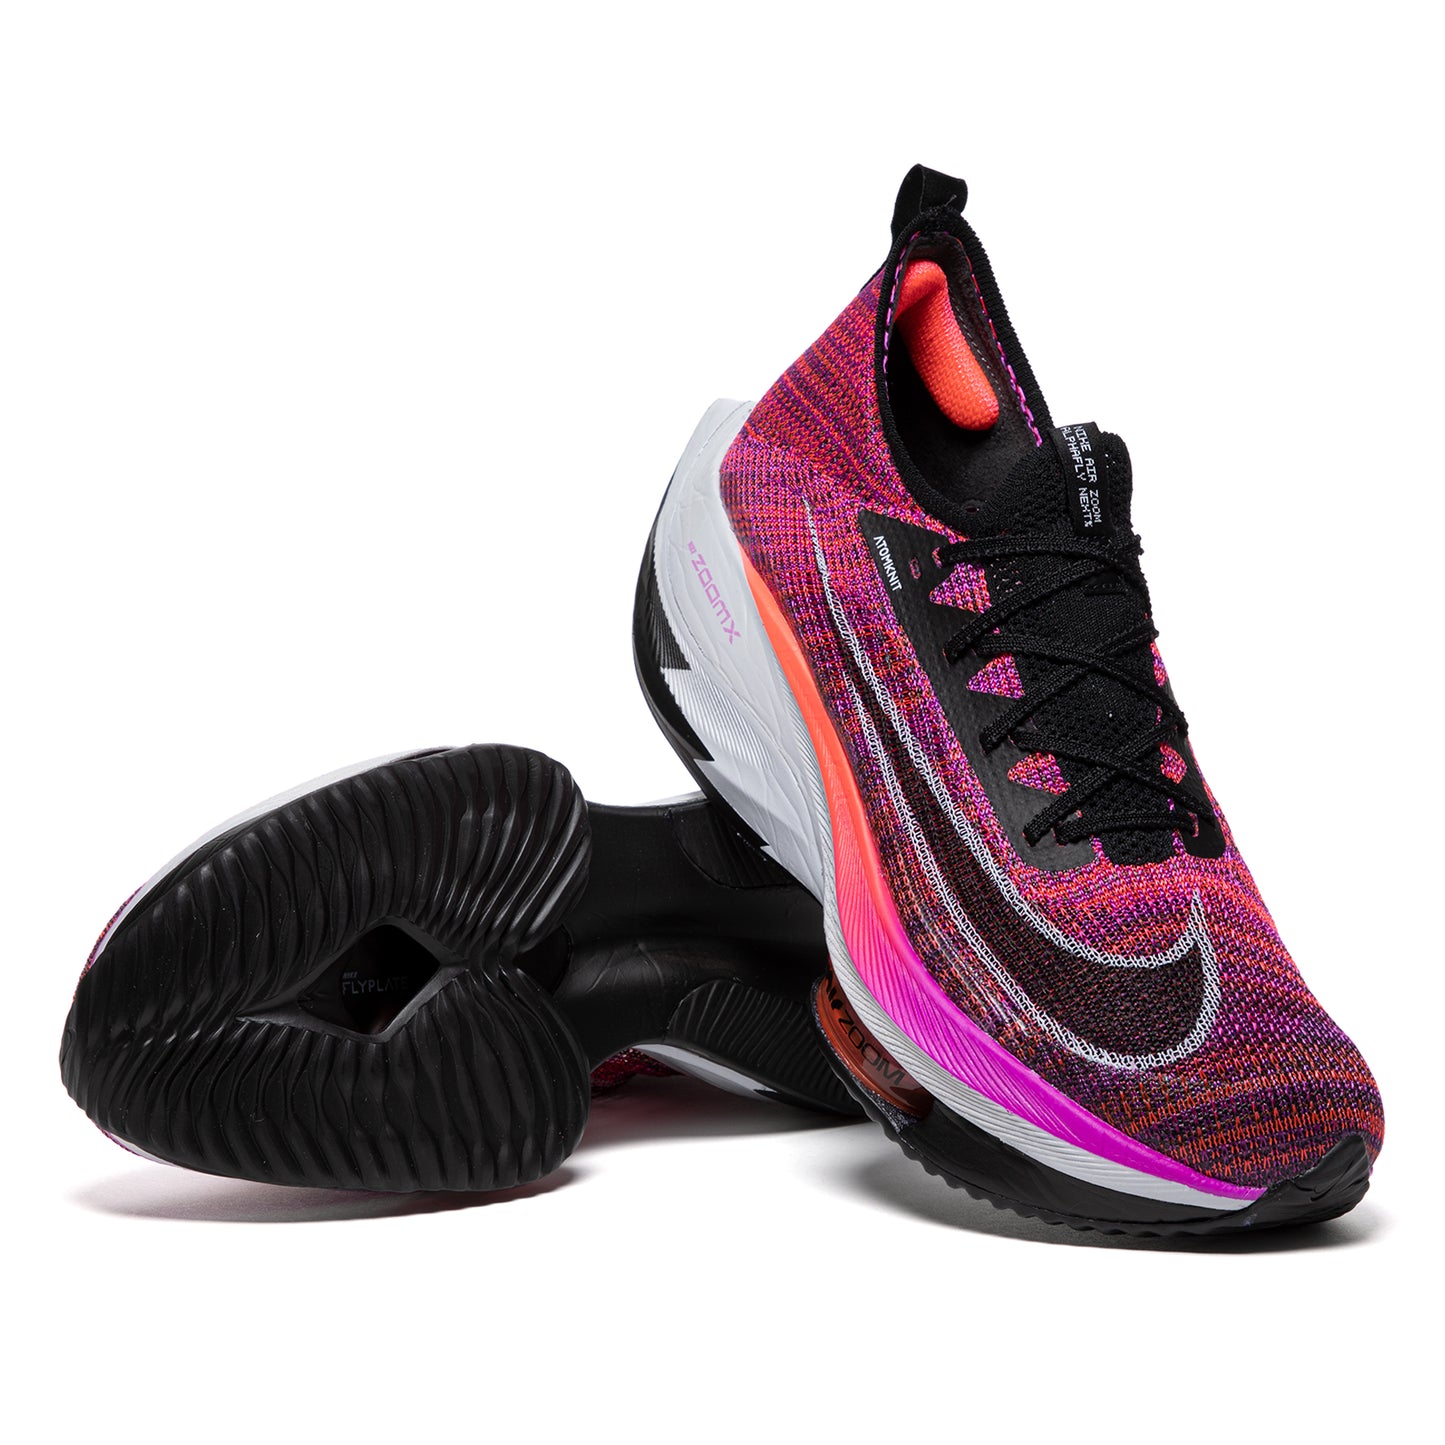 Nike Air Zoom Alphafly NEXT% Flyknit Road Racing Shoes (Hyper Violet/Black/Flash Crimson)